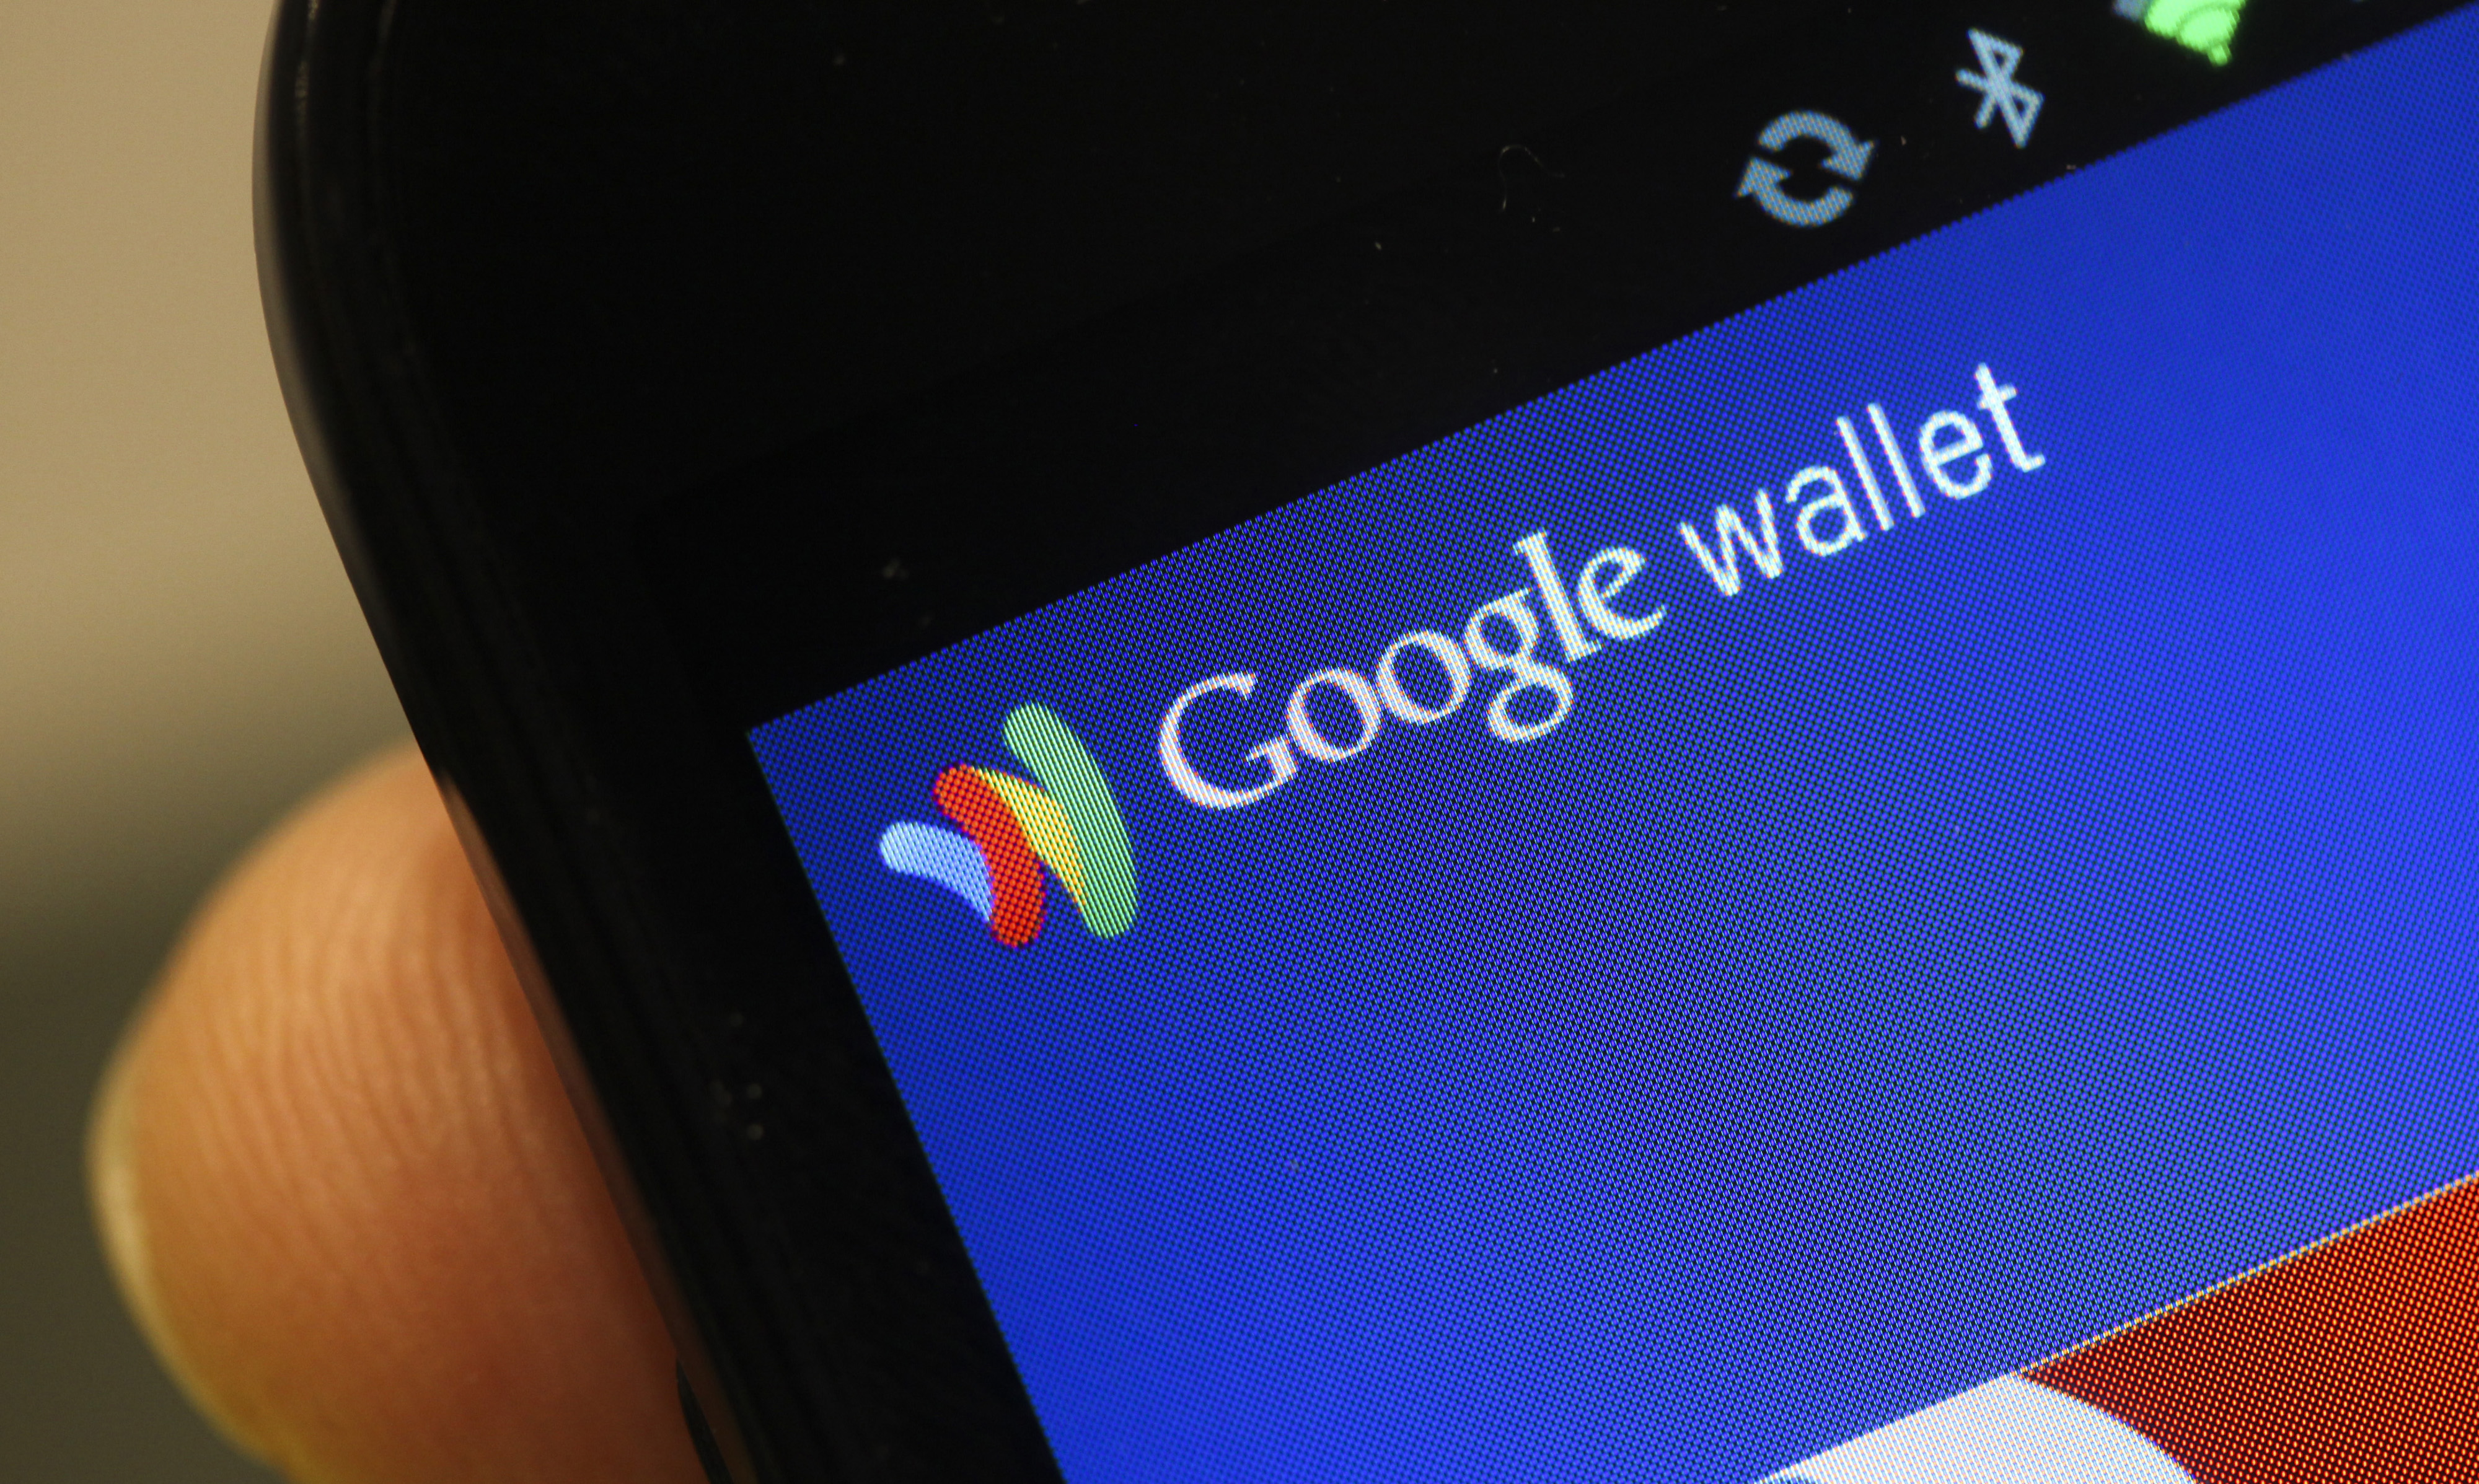 The Google Inc. Mobile Wallet application is displayed on a smartphone screen at the Mobile World Congress in Barcelona, Spain, on Feb. 29, 2012.